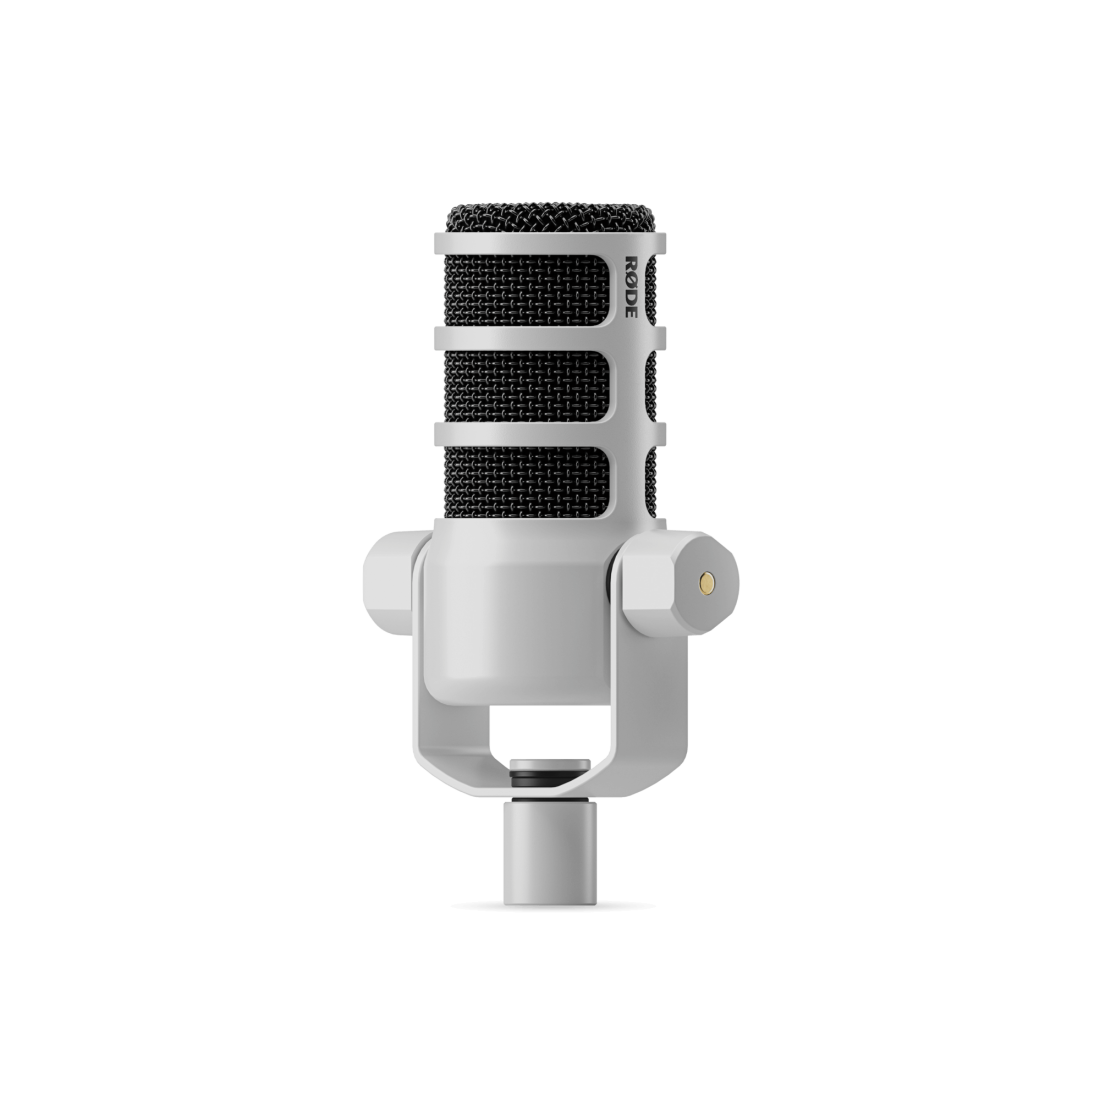 PodMic Dynamic Podcasting Microphone - White